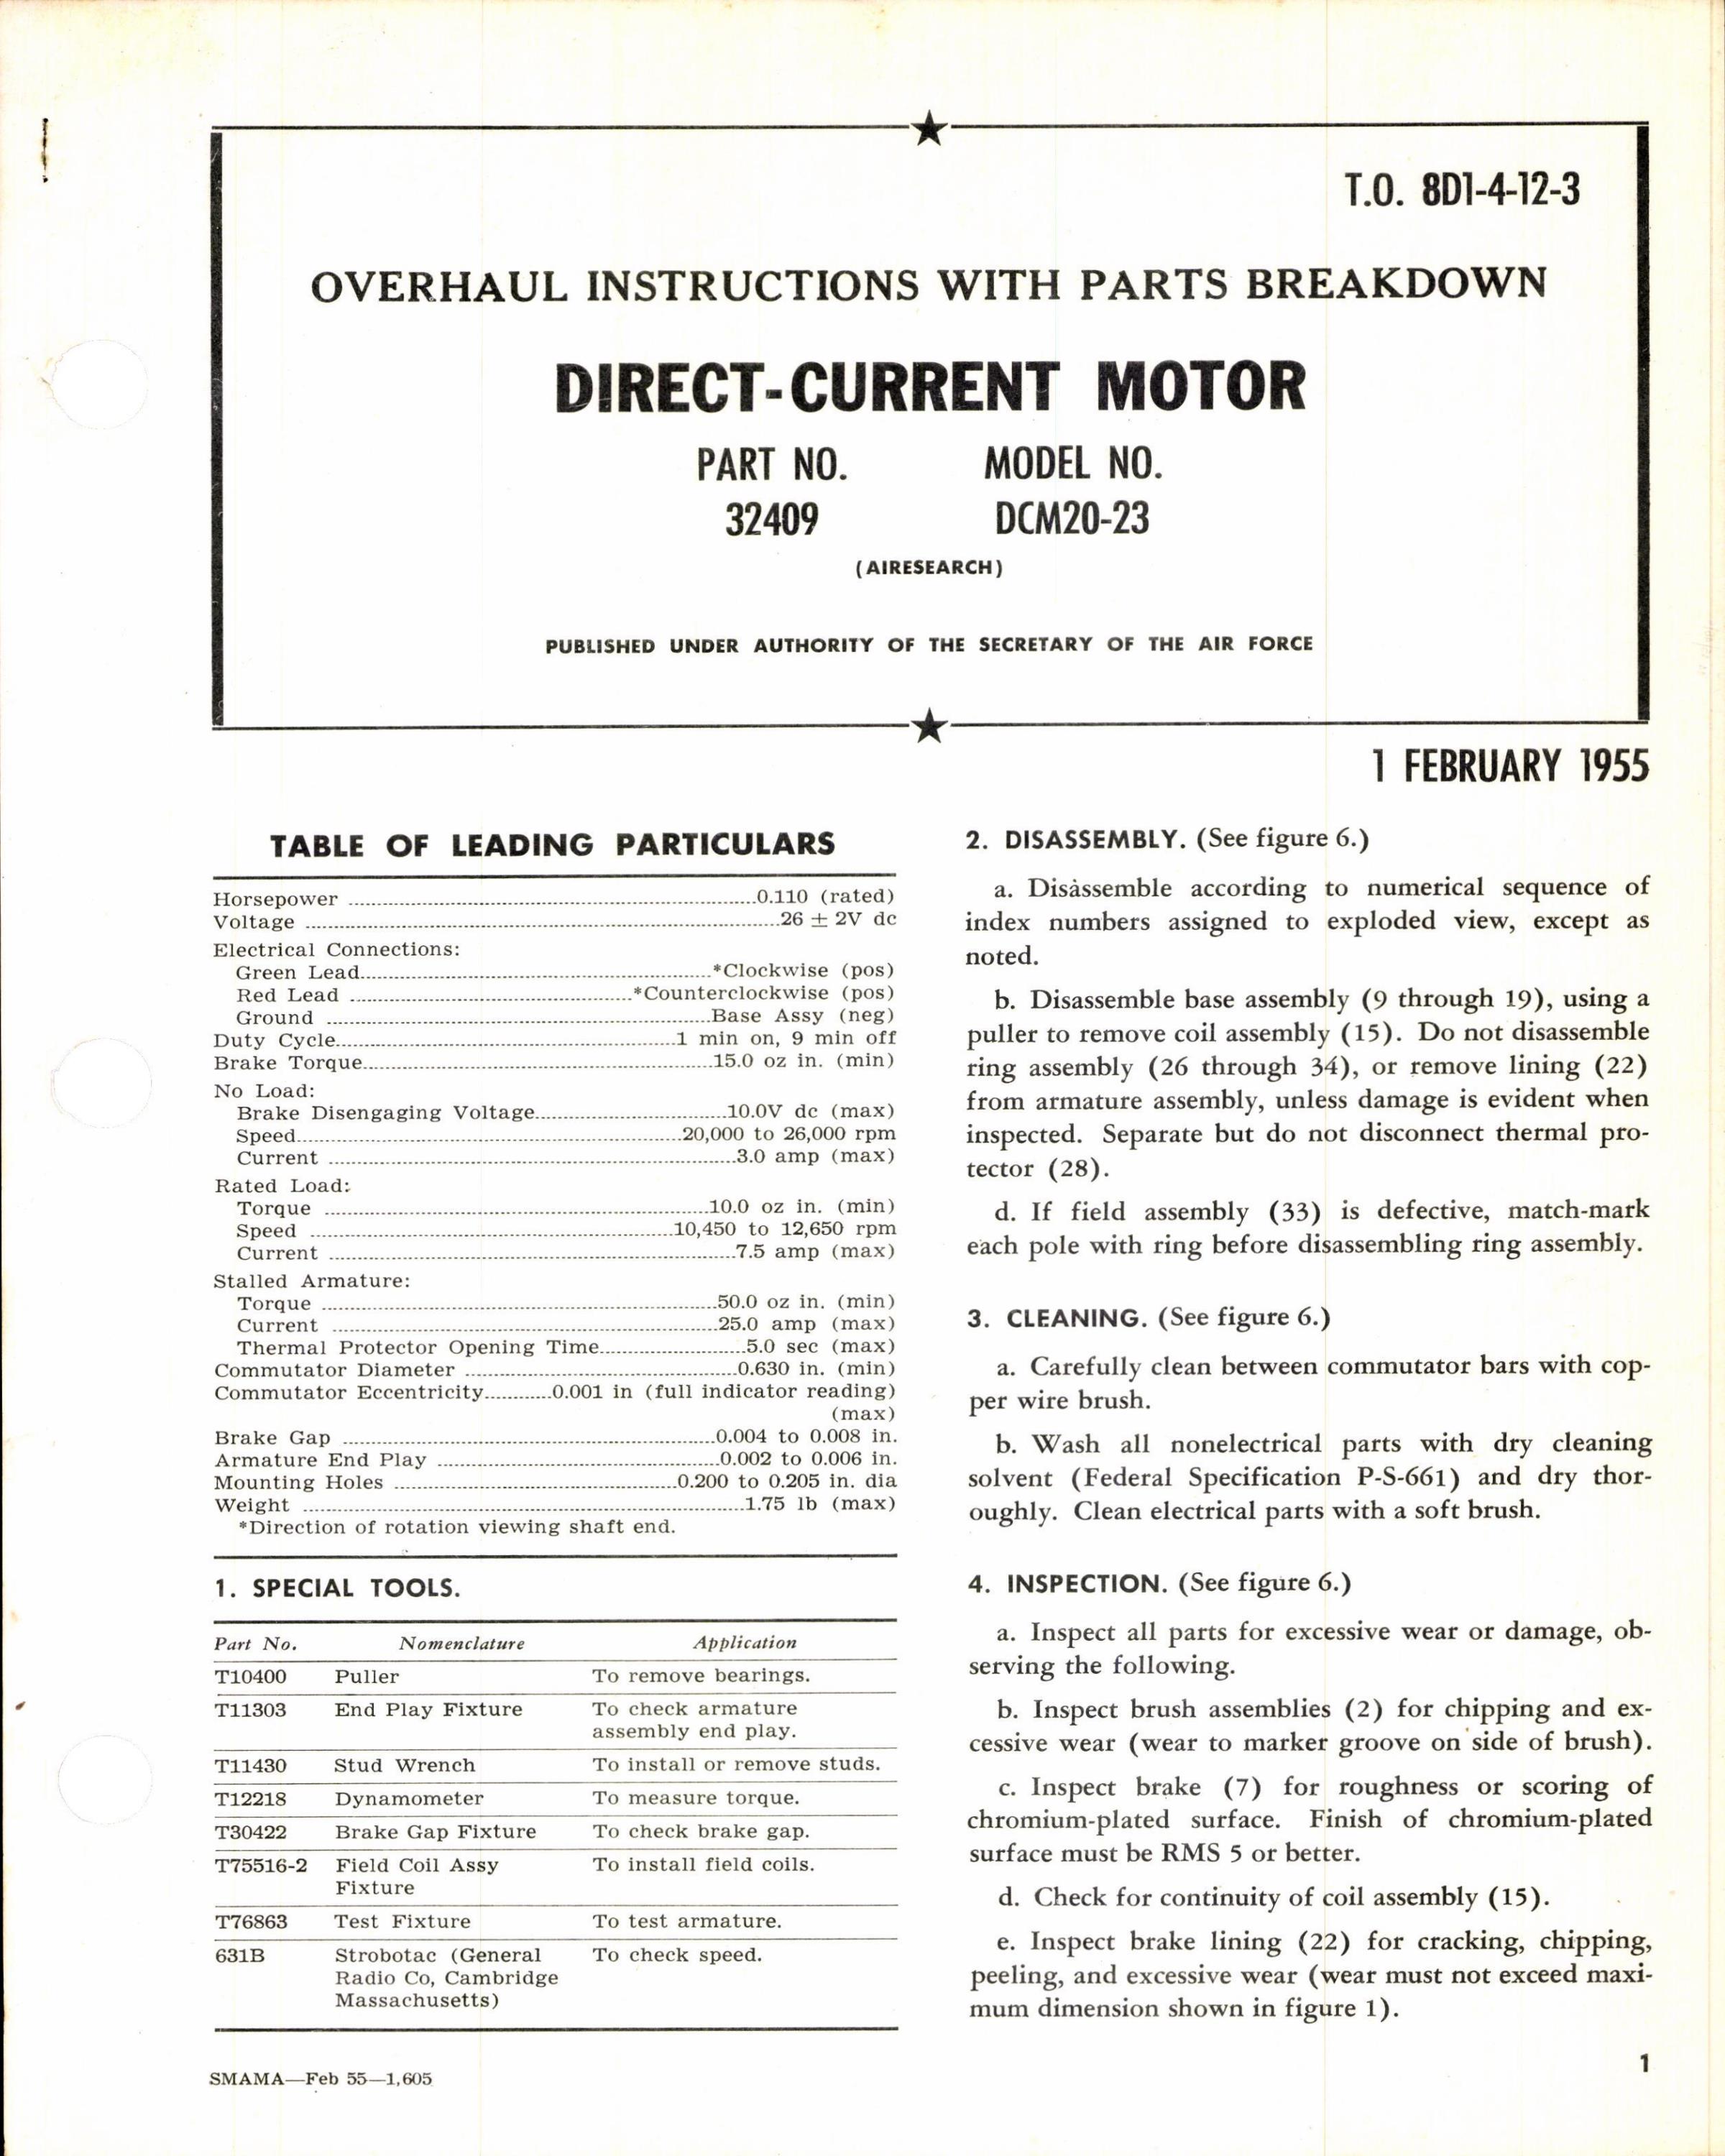 Sample page 1 from AirCorps Library document: Overhaul Instructions with Parts Breakdown for Direct-Current Motor Model DCM20-23, Part No 32409